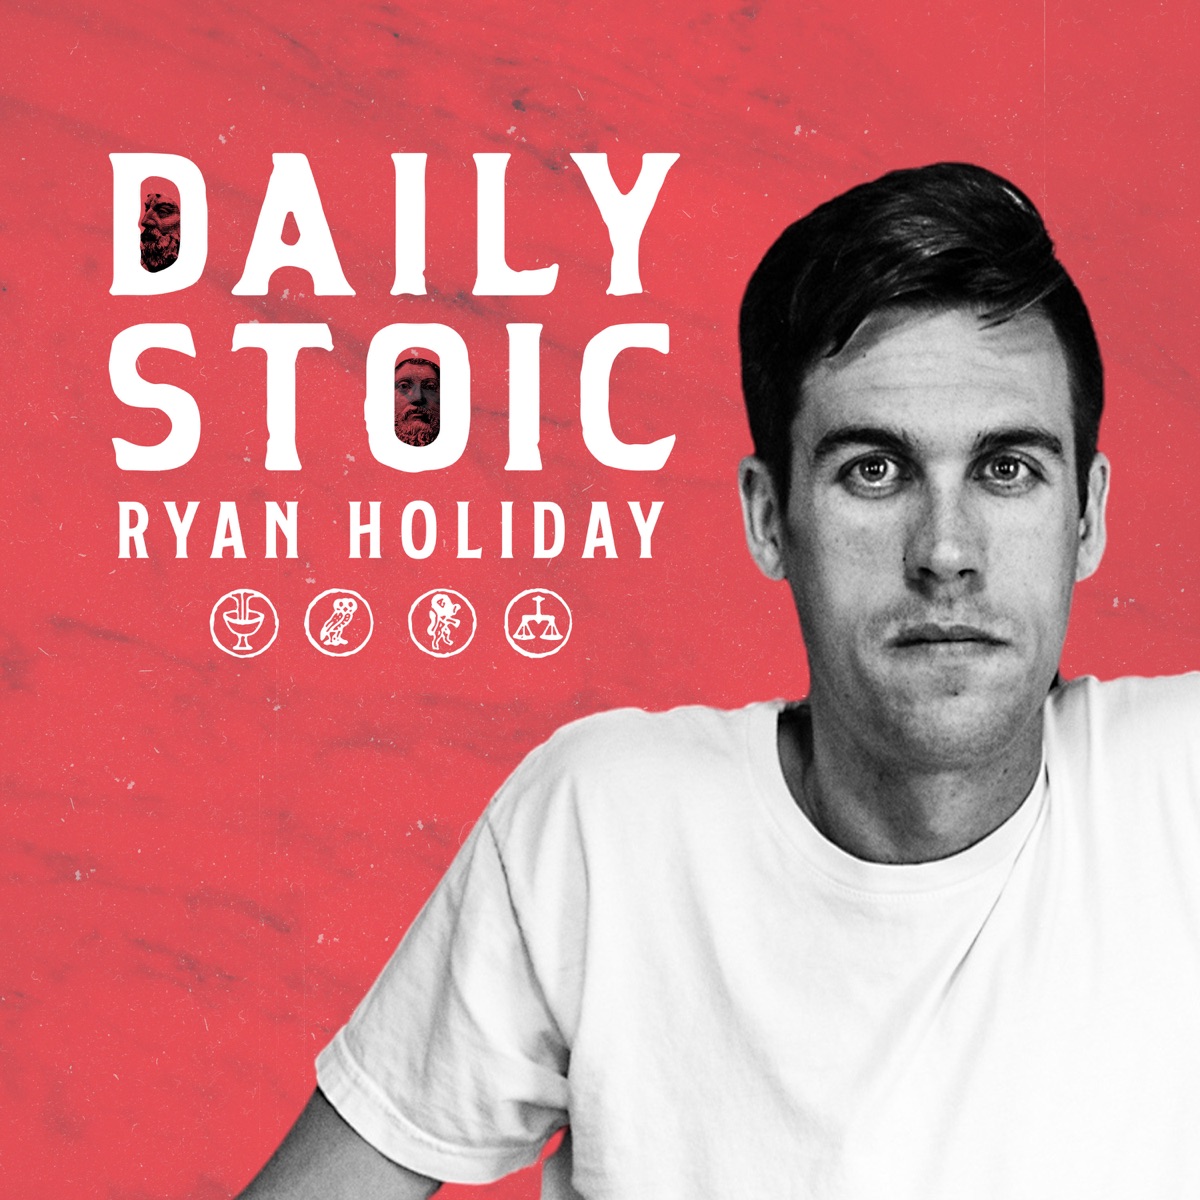 Ryan Holiday, Eagles Talent, Bestselling Author, Young Entrepreneurs